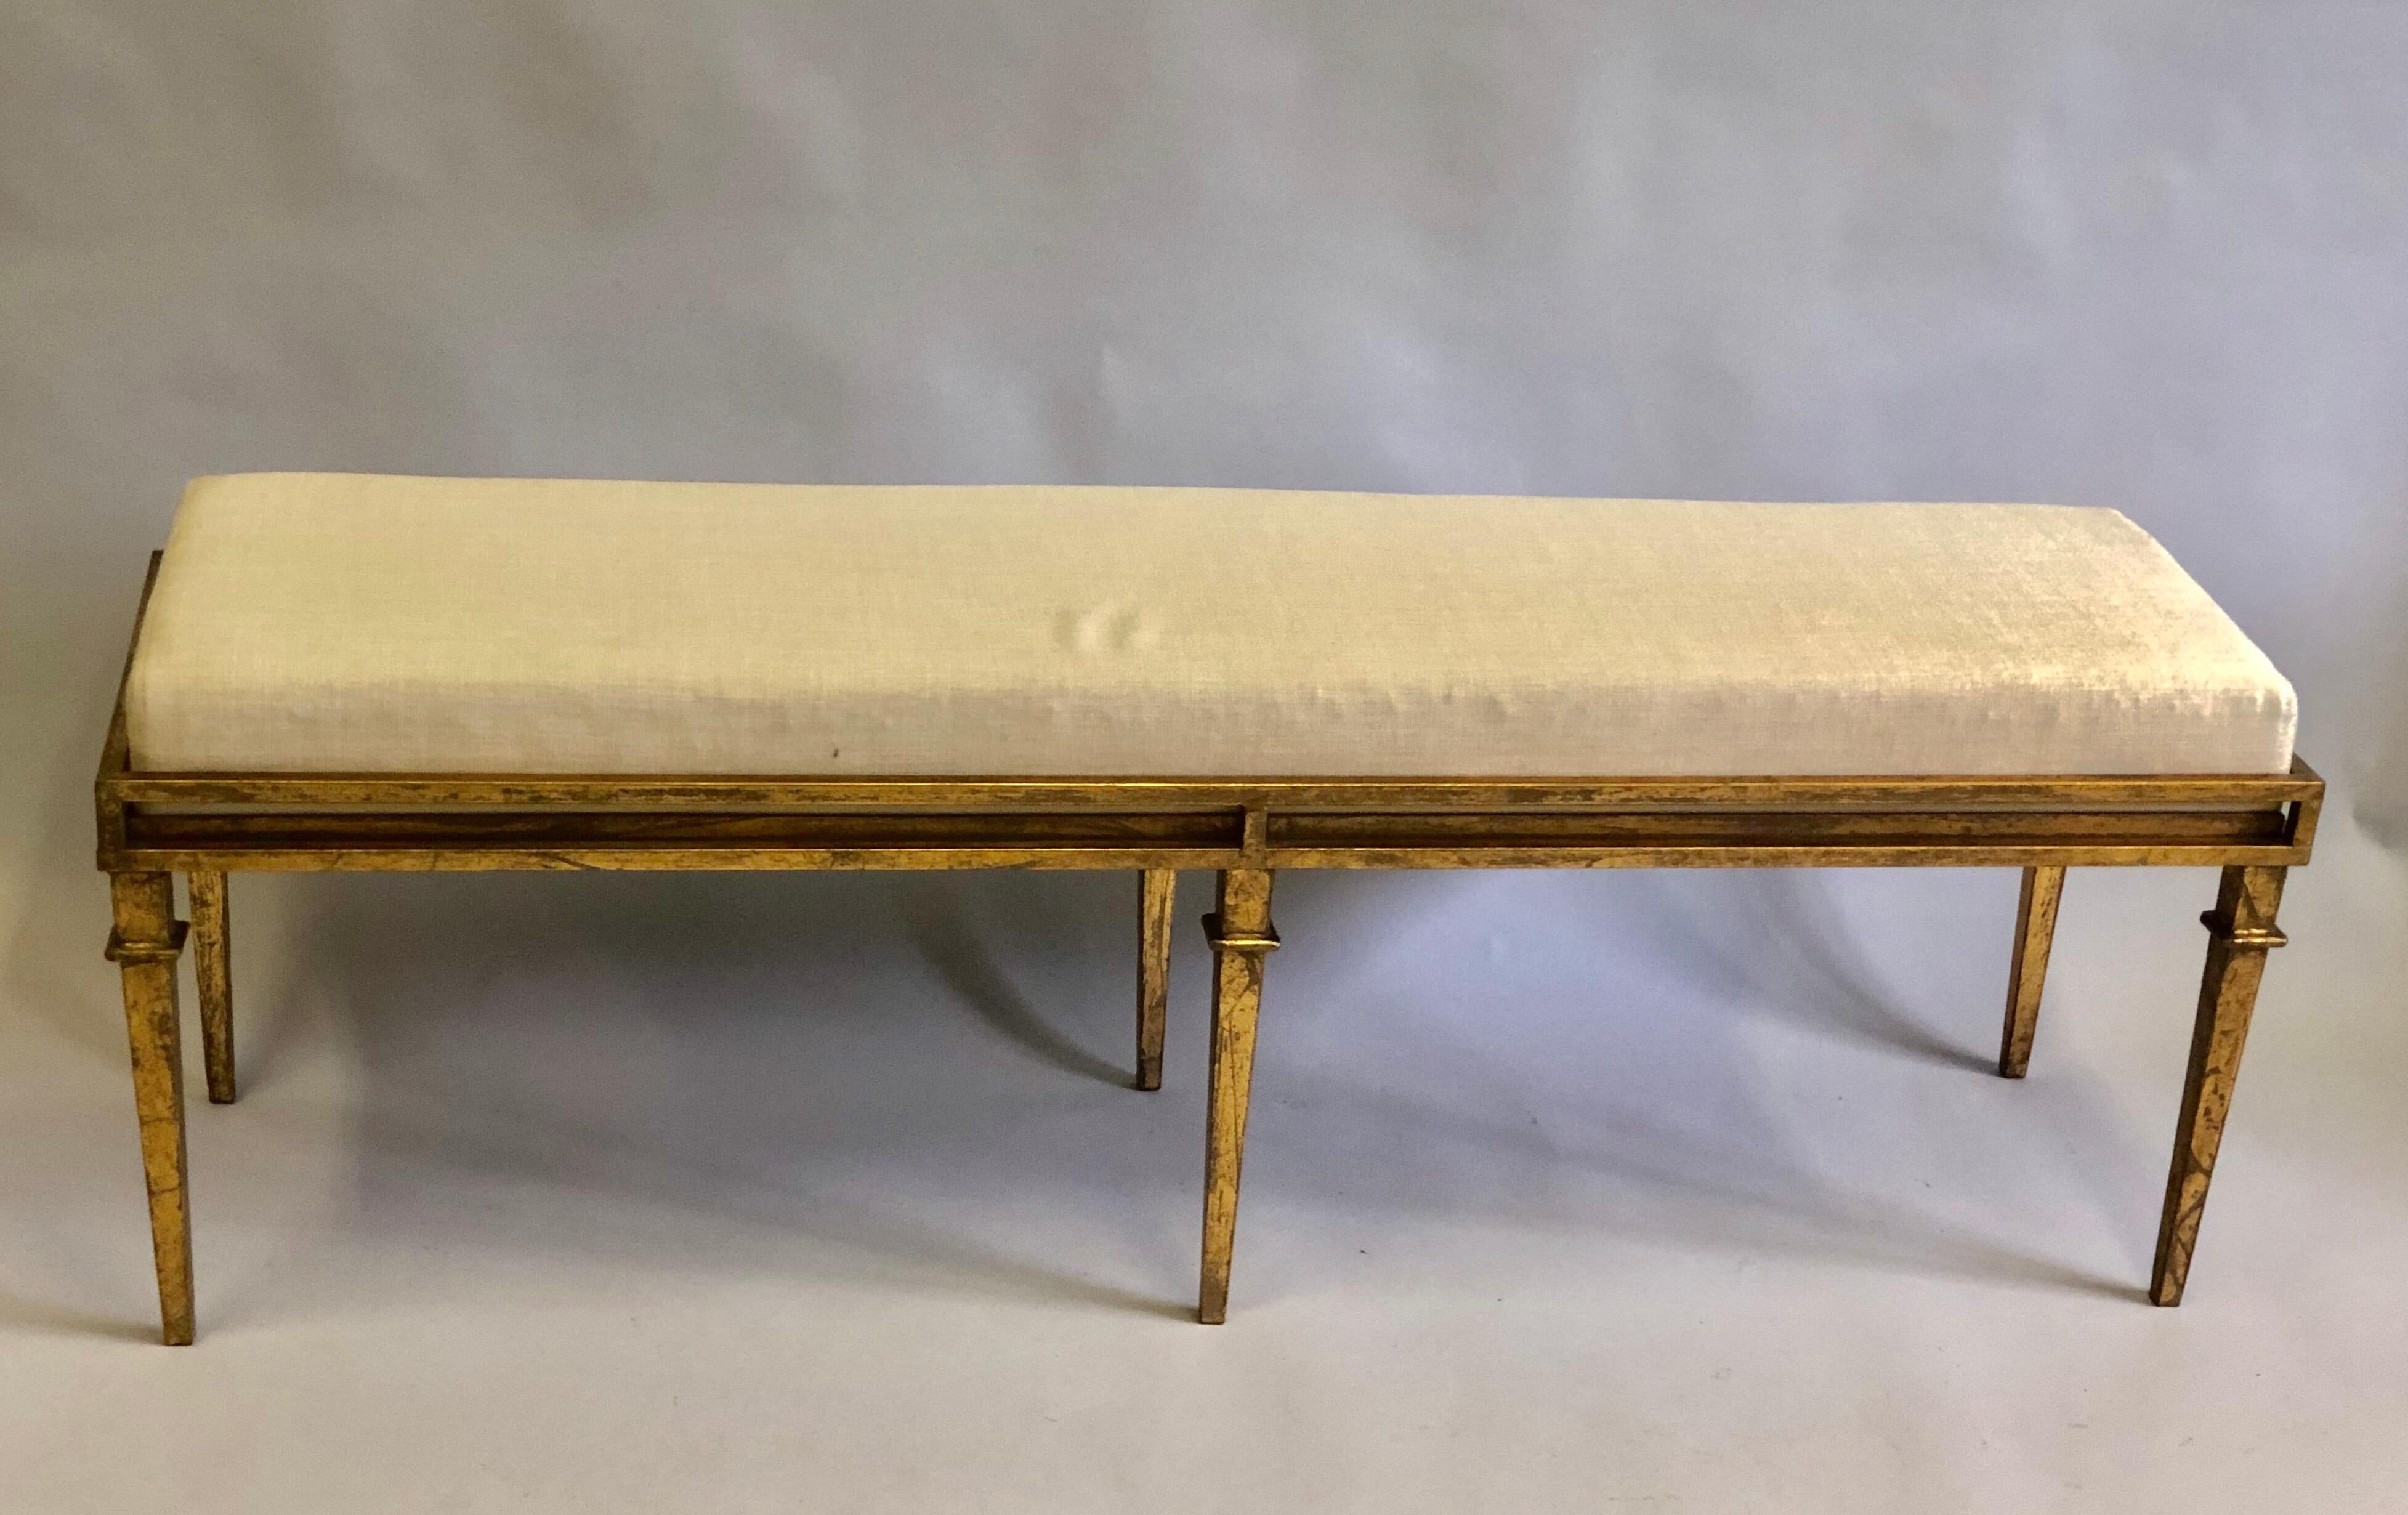 20th Century French Modern Neoclassical Gilt Iron Bench in the style of Maison Ramsay For Sale